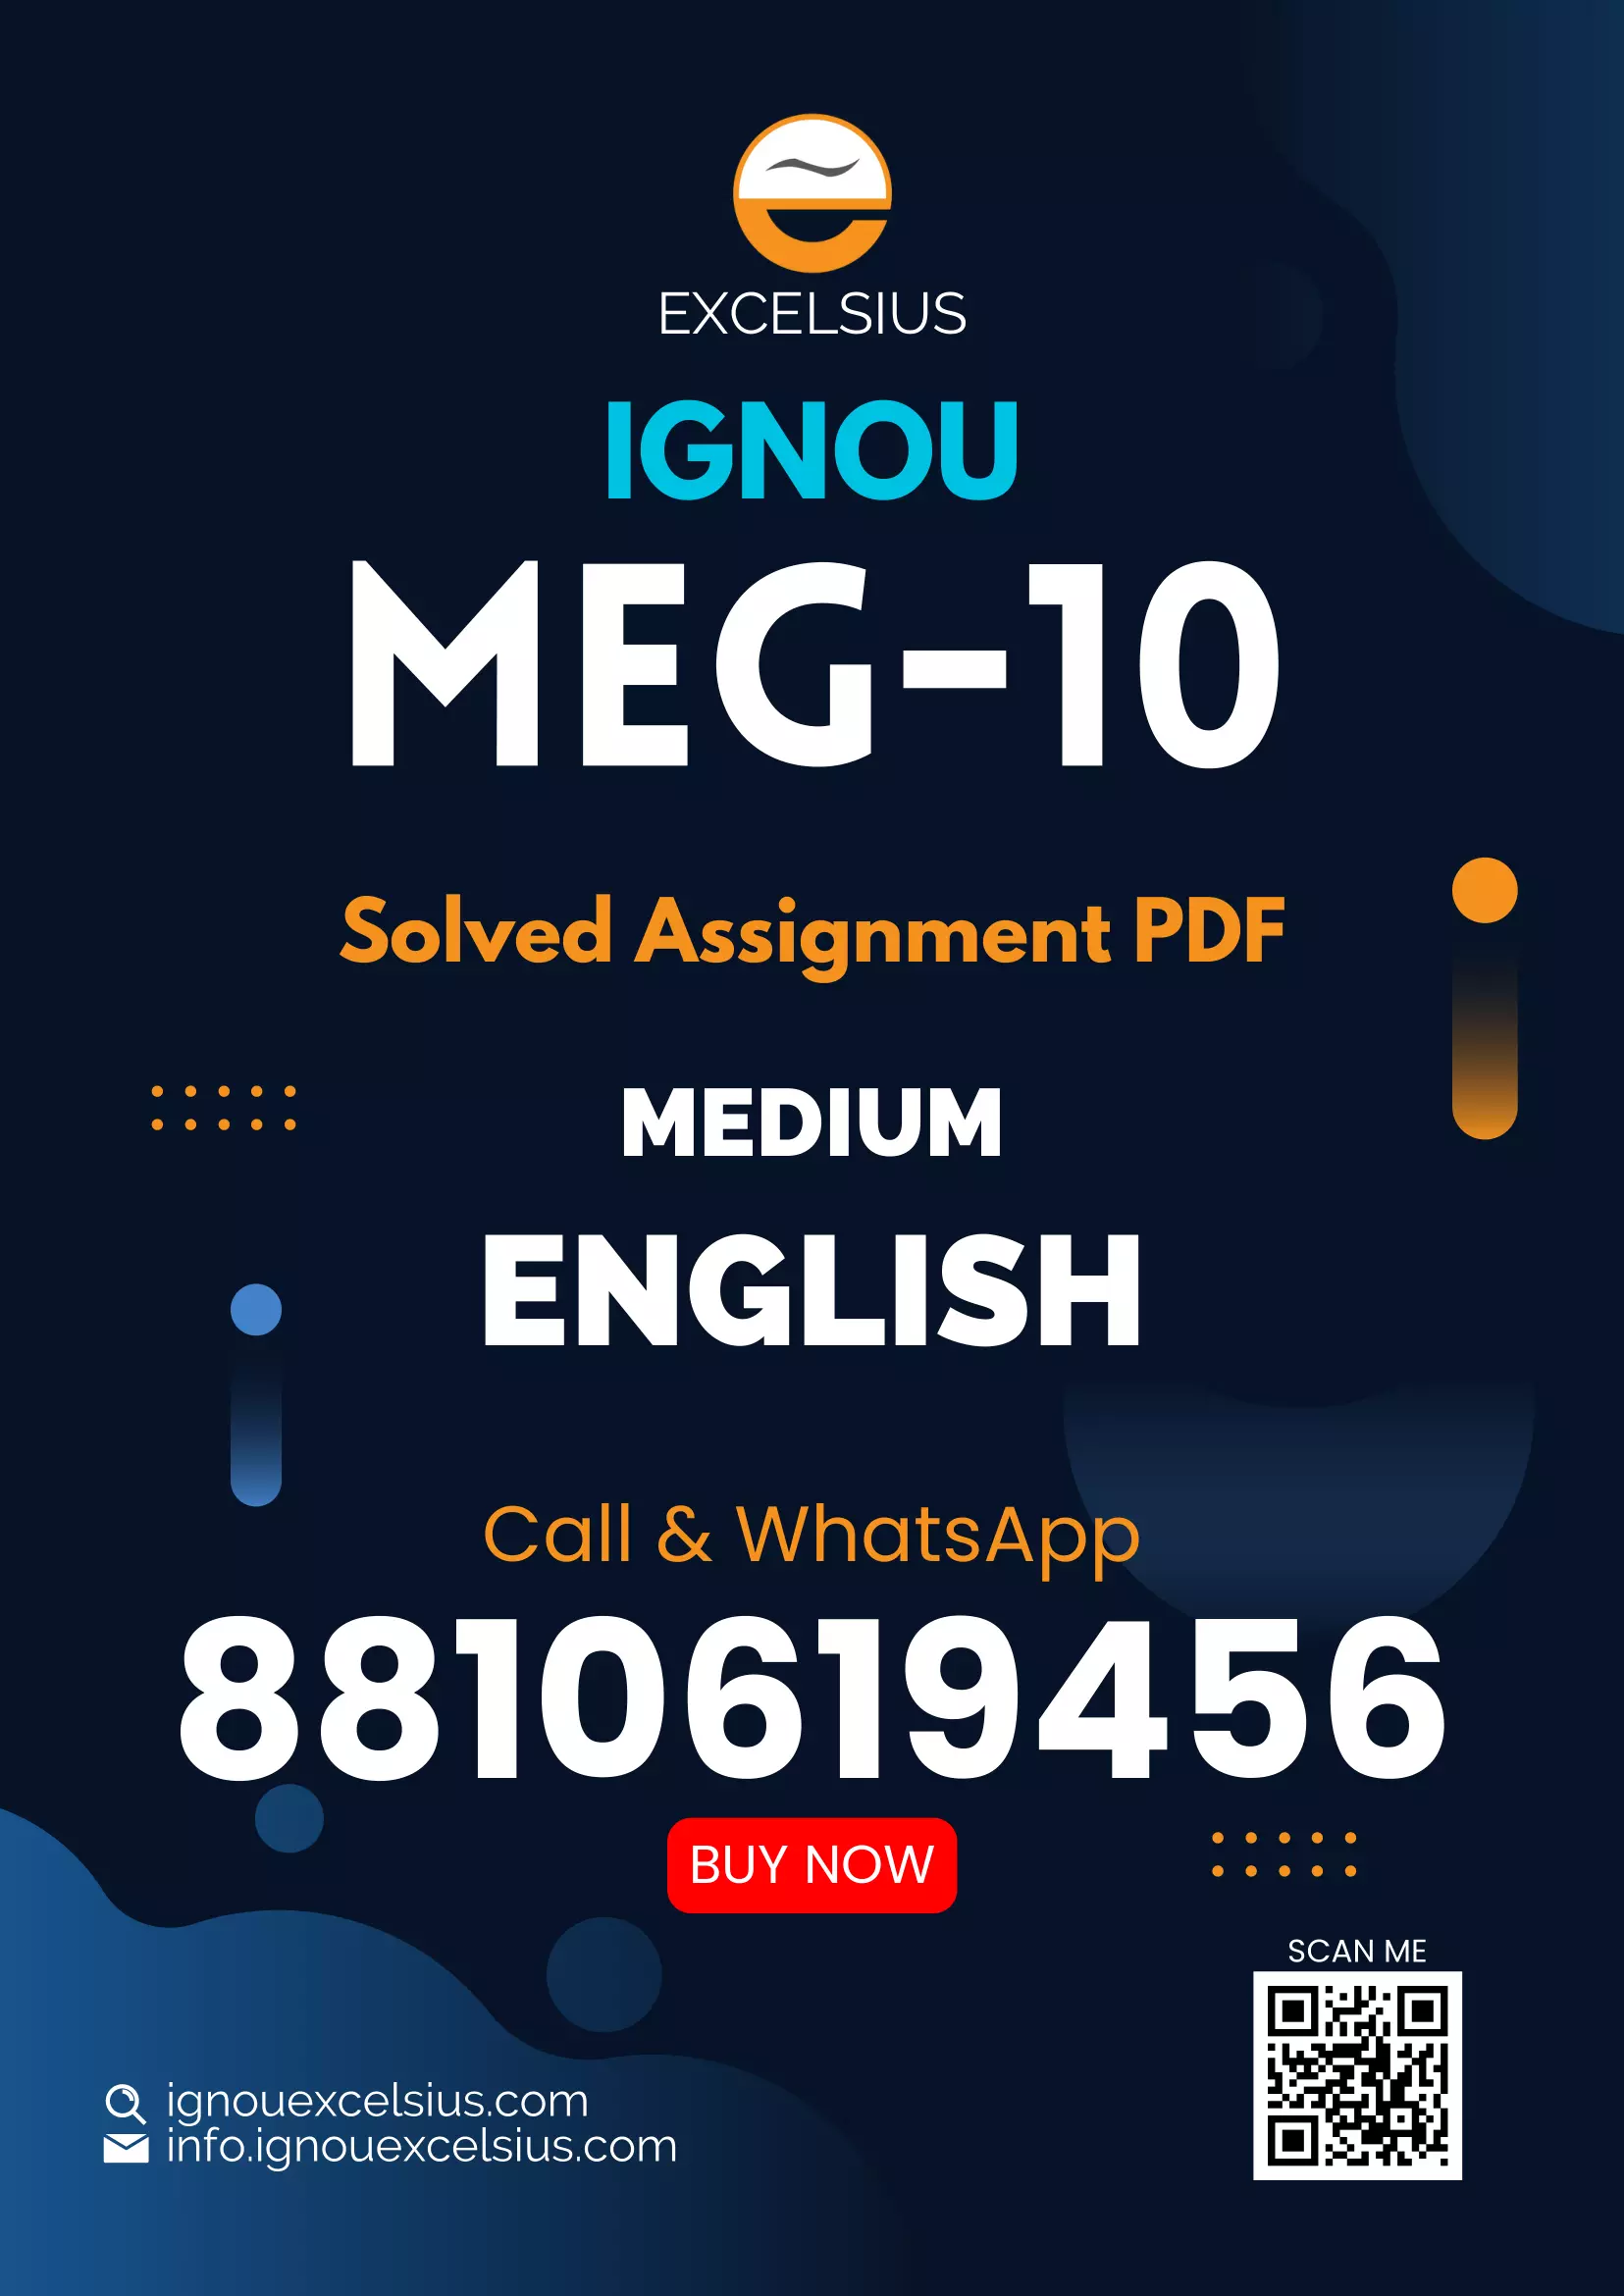 IGNOU MEG-10 - English Studies in India Latest Solved Assignment-July 2022 – January 2023